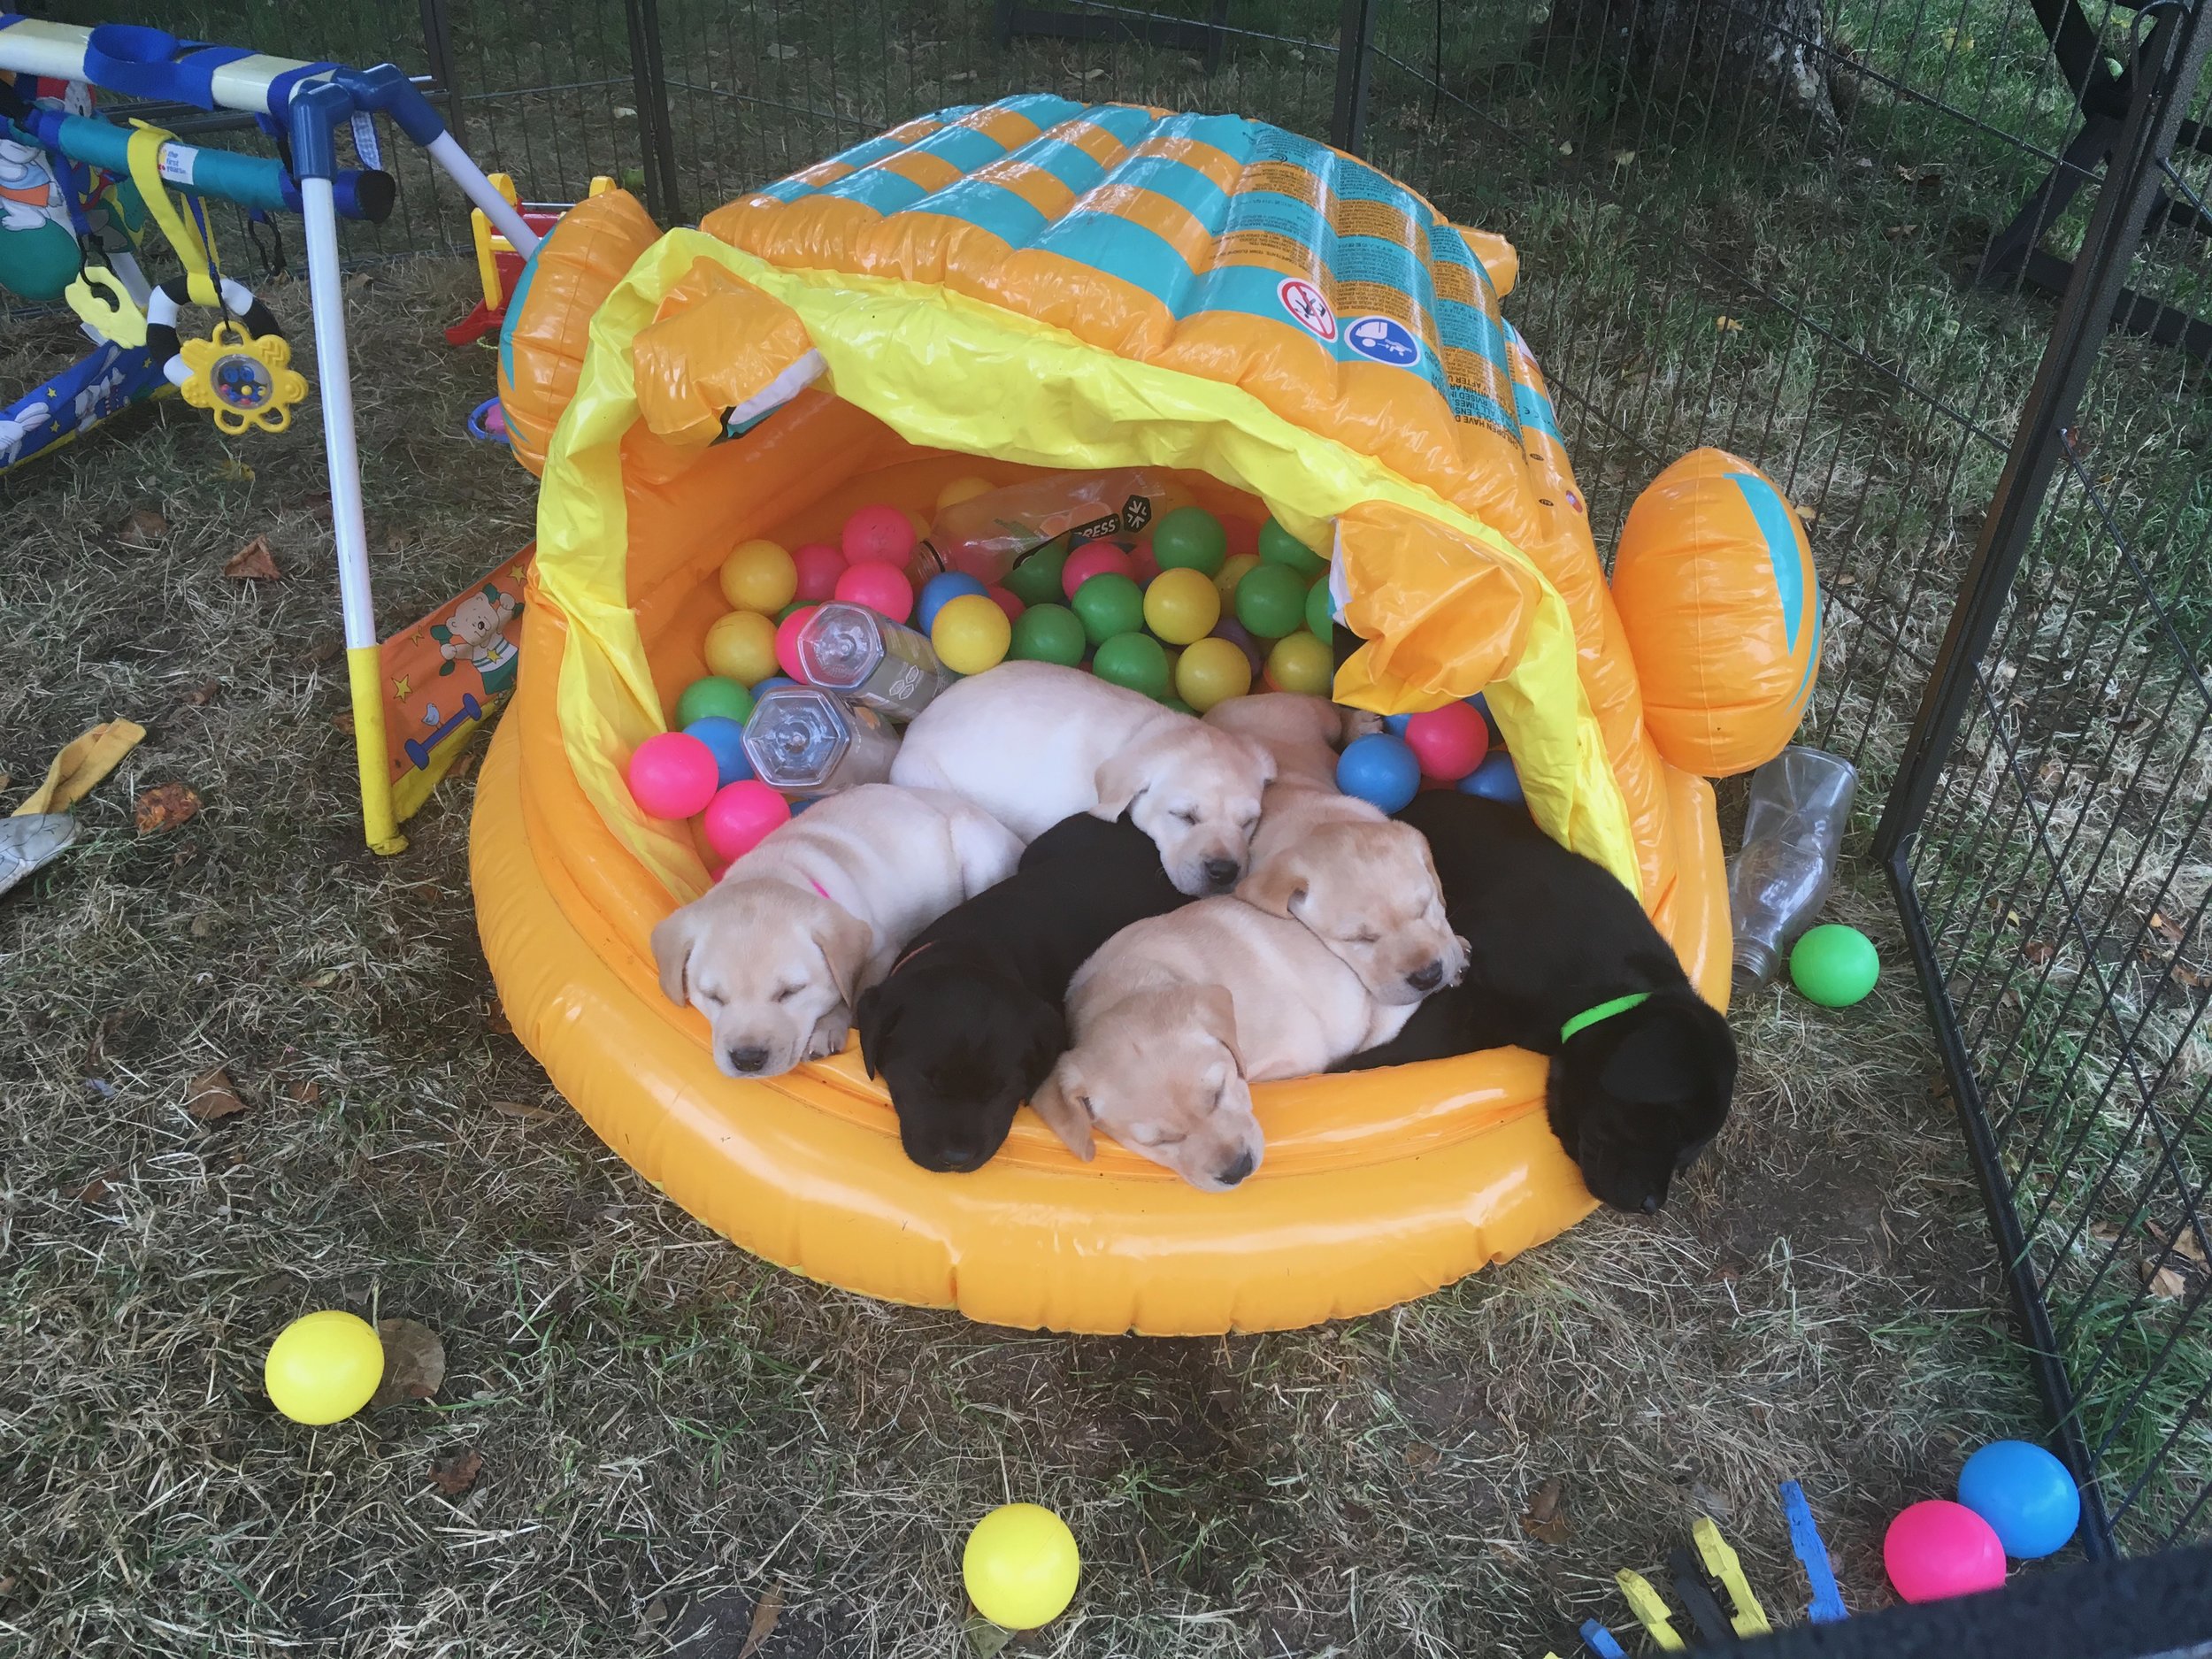 STIMULATING EXPERIENCES IN A BALL PIT